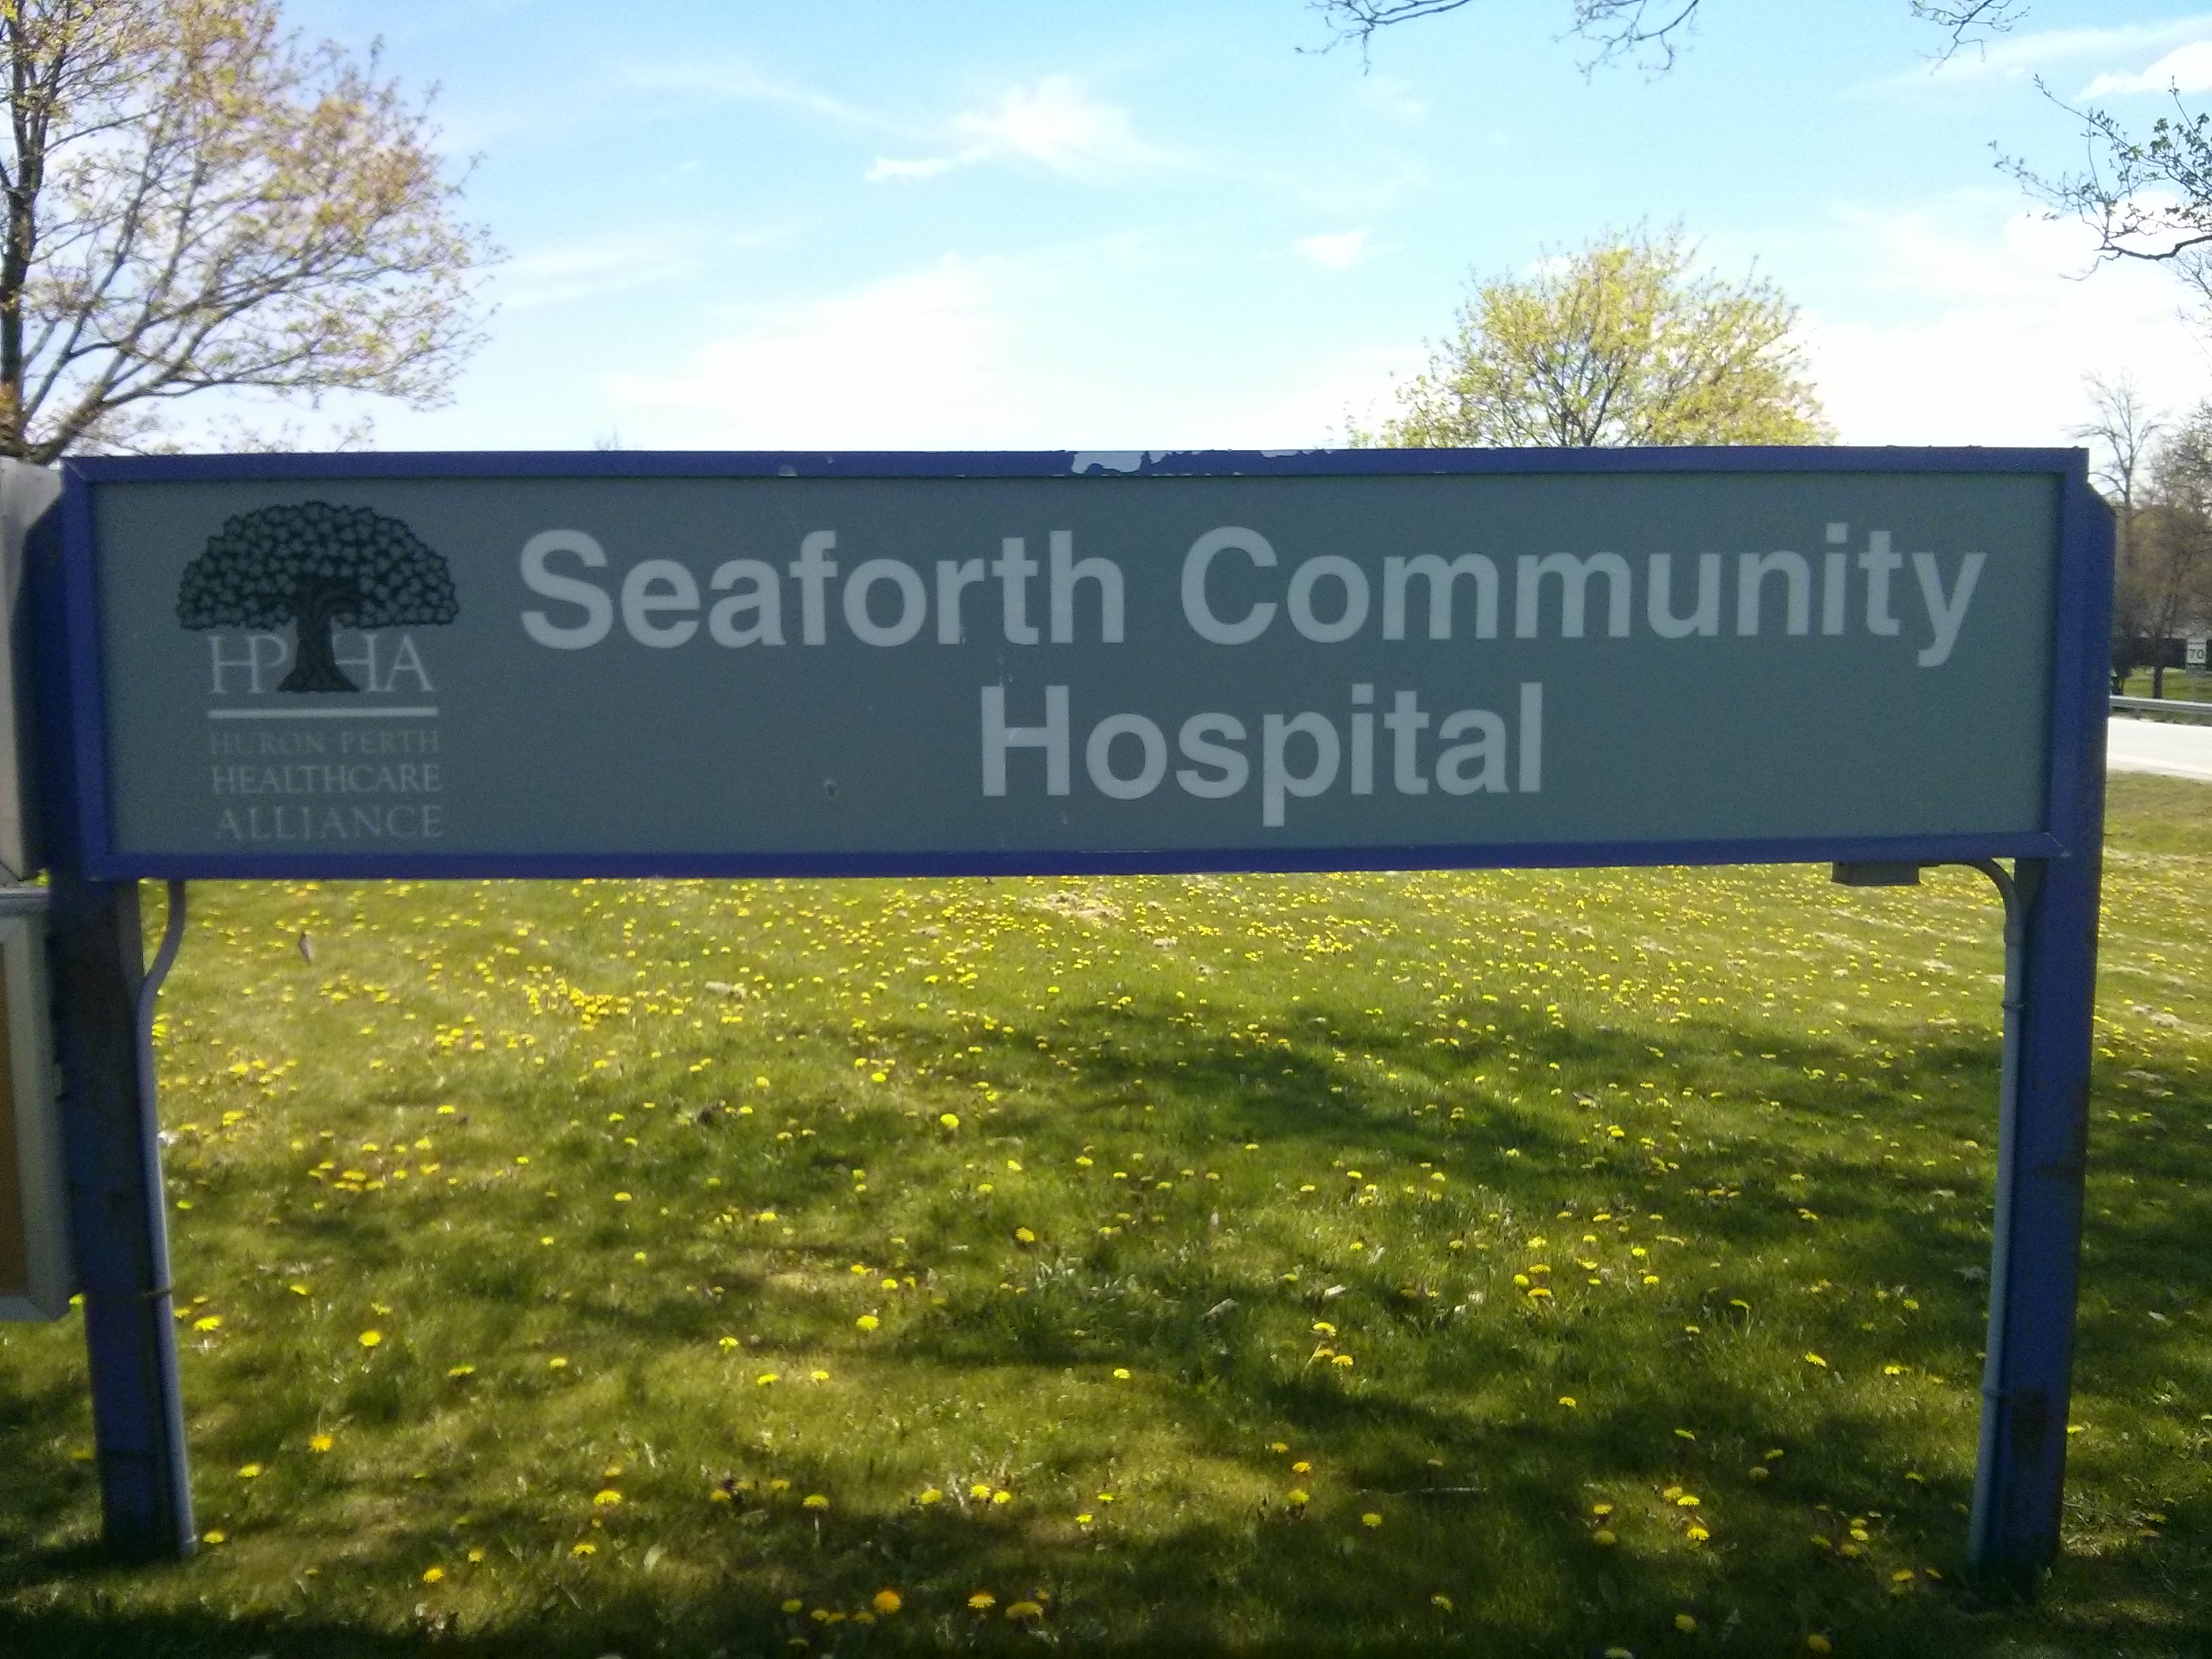 Seaforth Community Hospital closing overnight, reduced weekend hours